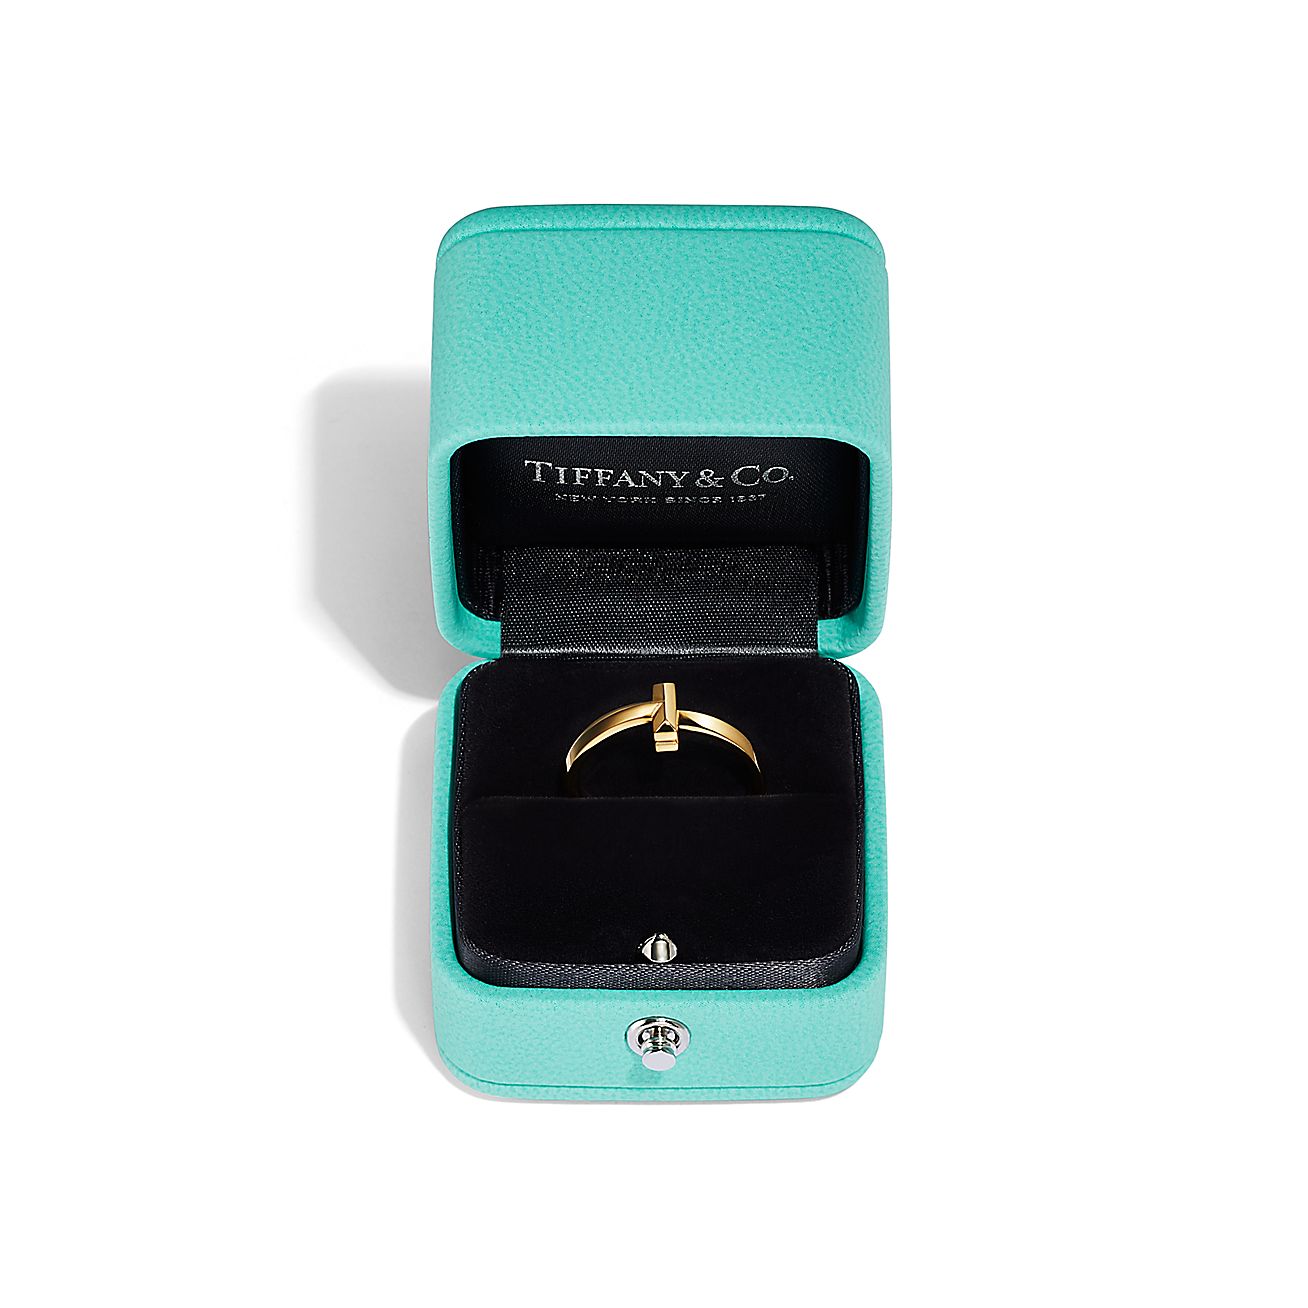 Tiffany T T1 Ring in Yellow Gold, 2.5 mm Wide